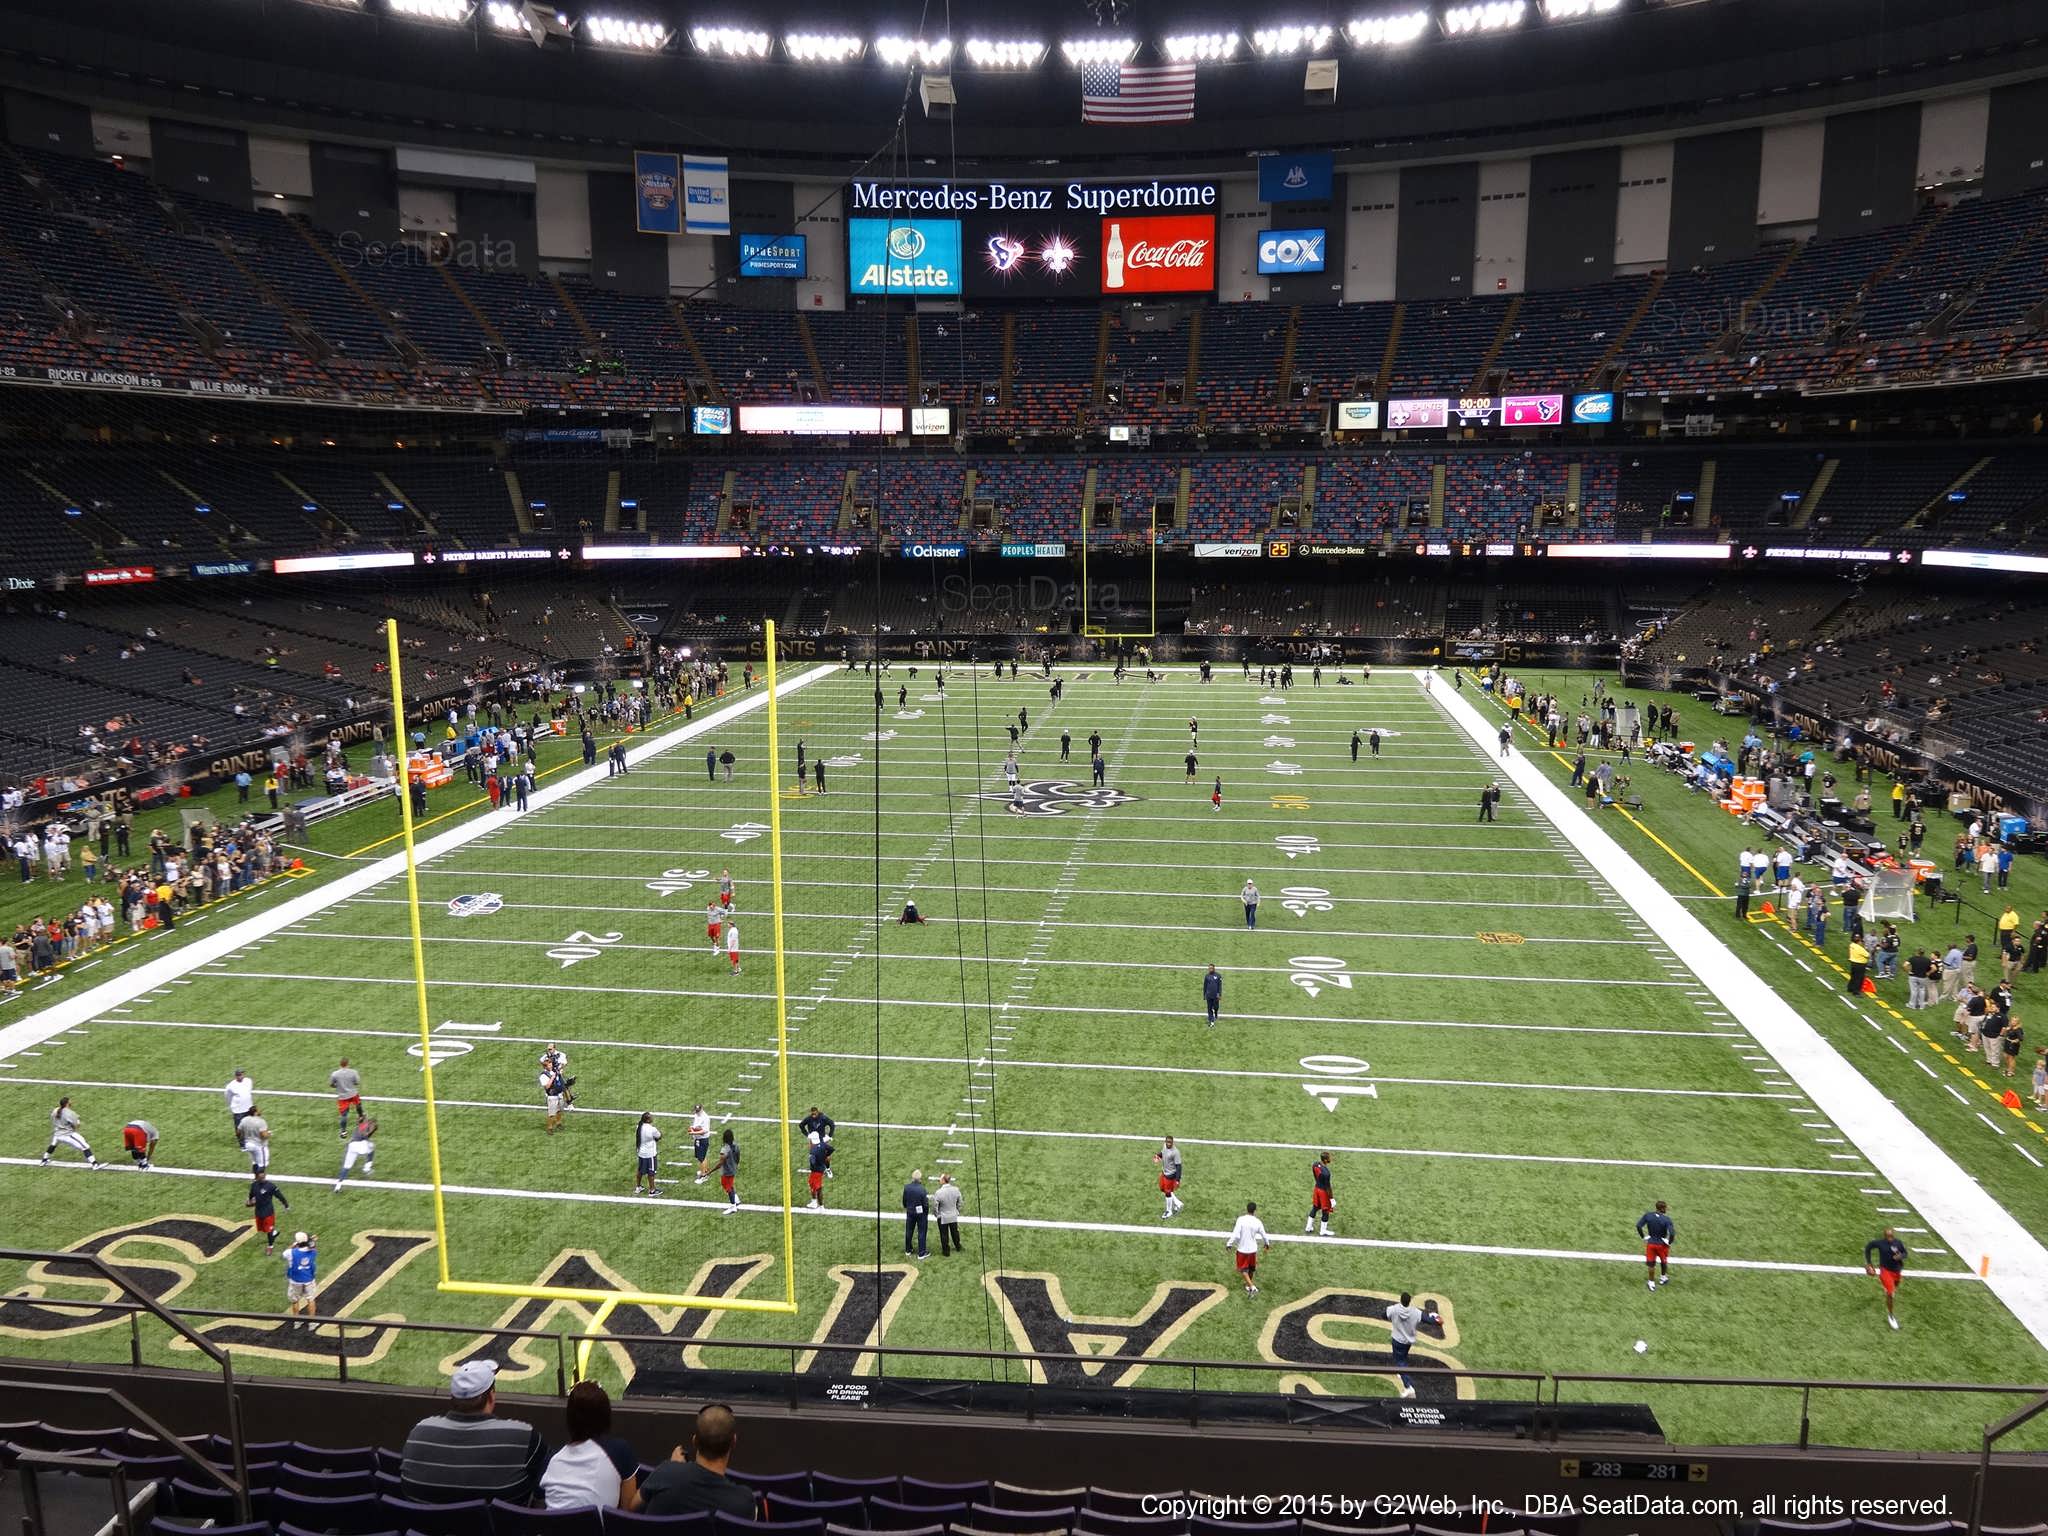 Seat view from section 347 at the Mercedes-Benz Superdome, home of the New Orleans Saints